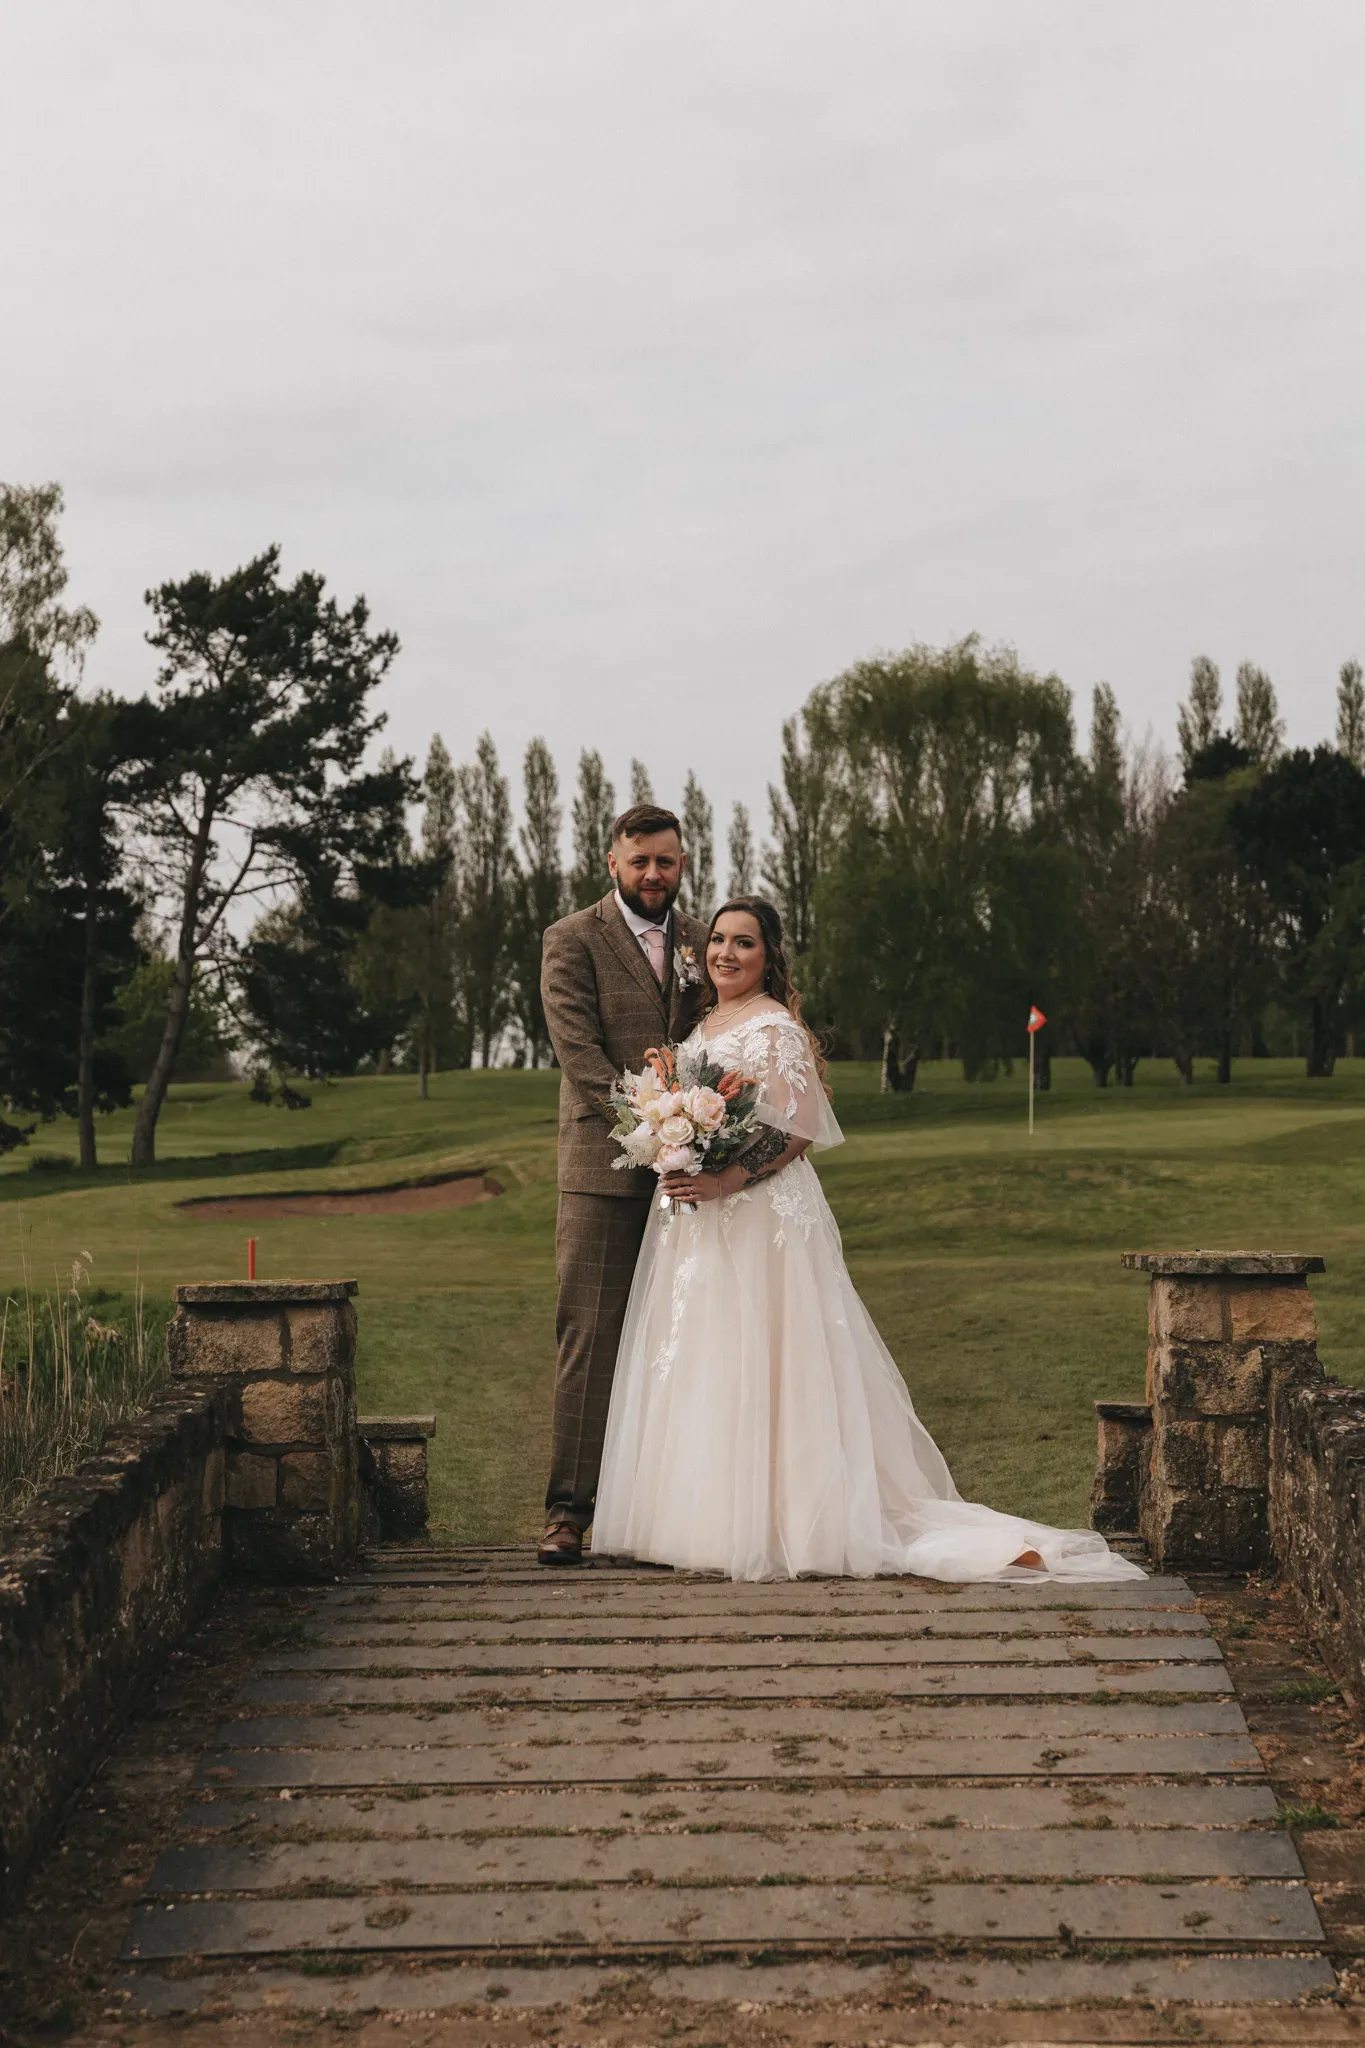 A bride in a white dress and a groom in a gray suit stand on a stone bridge in a park. the bride holds a bouquet and they both smile at the camera, with green trees and a cloudy sky in the background.